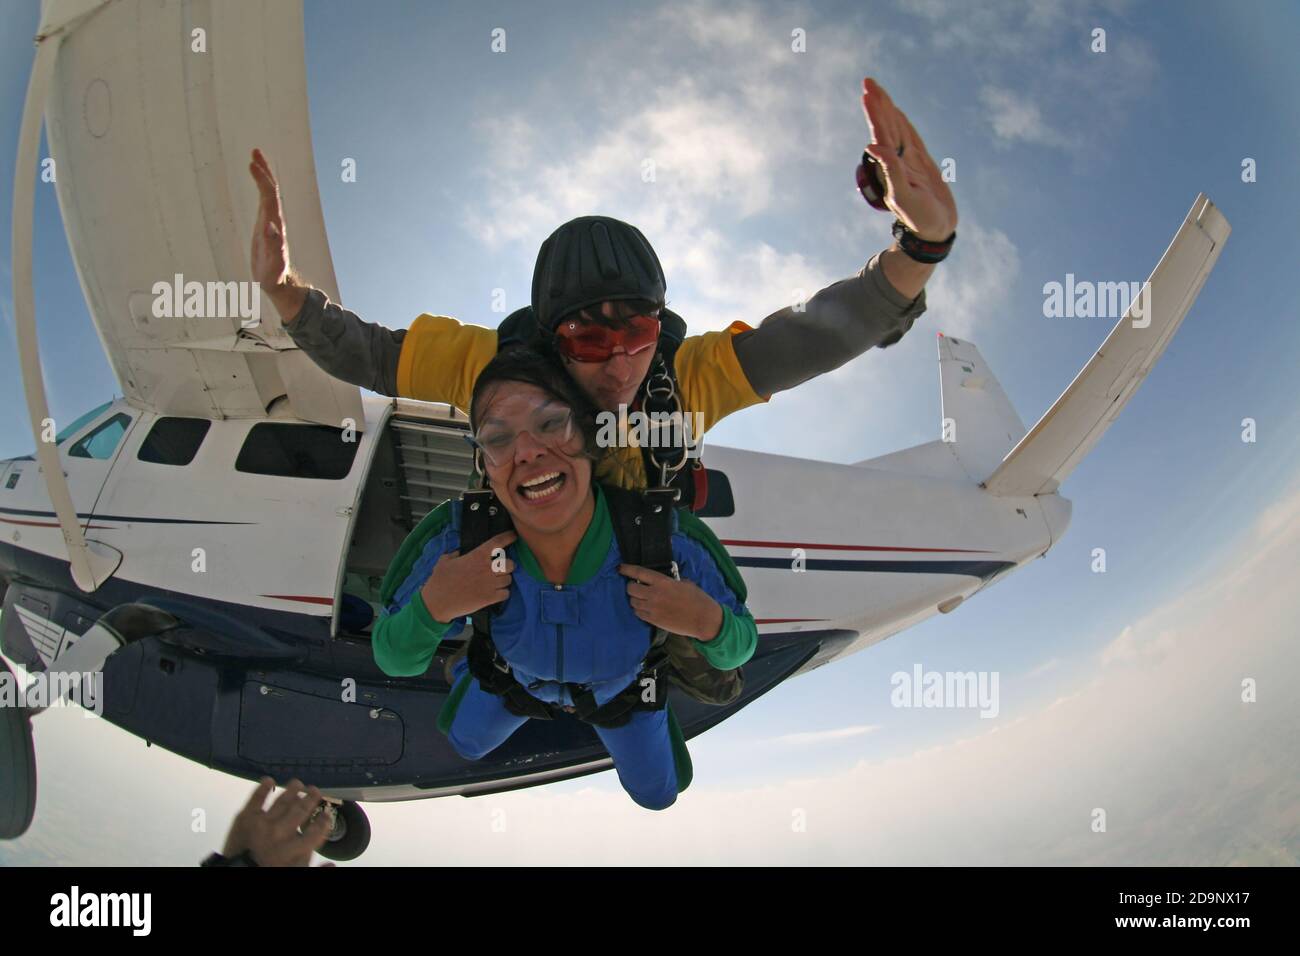 Skydive tandem jump extreme sports Stock Photo